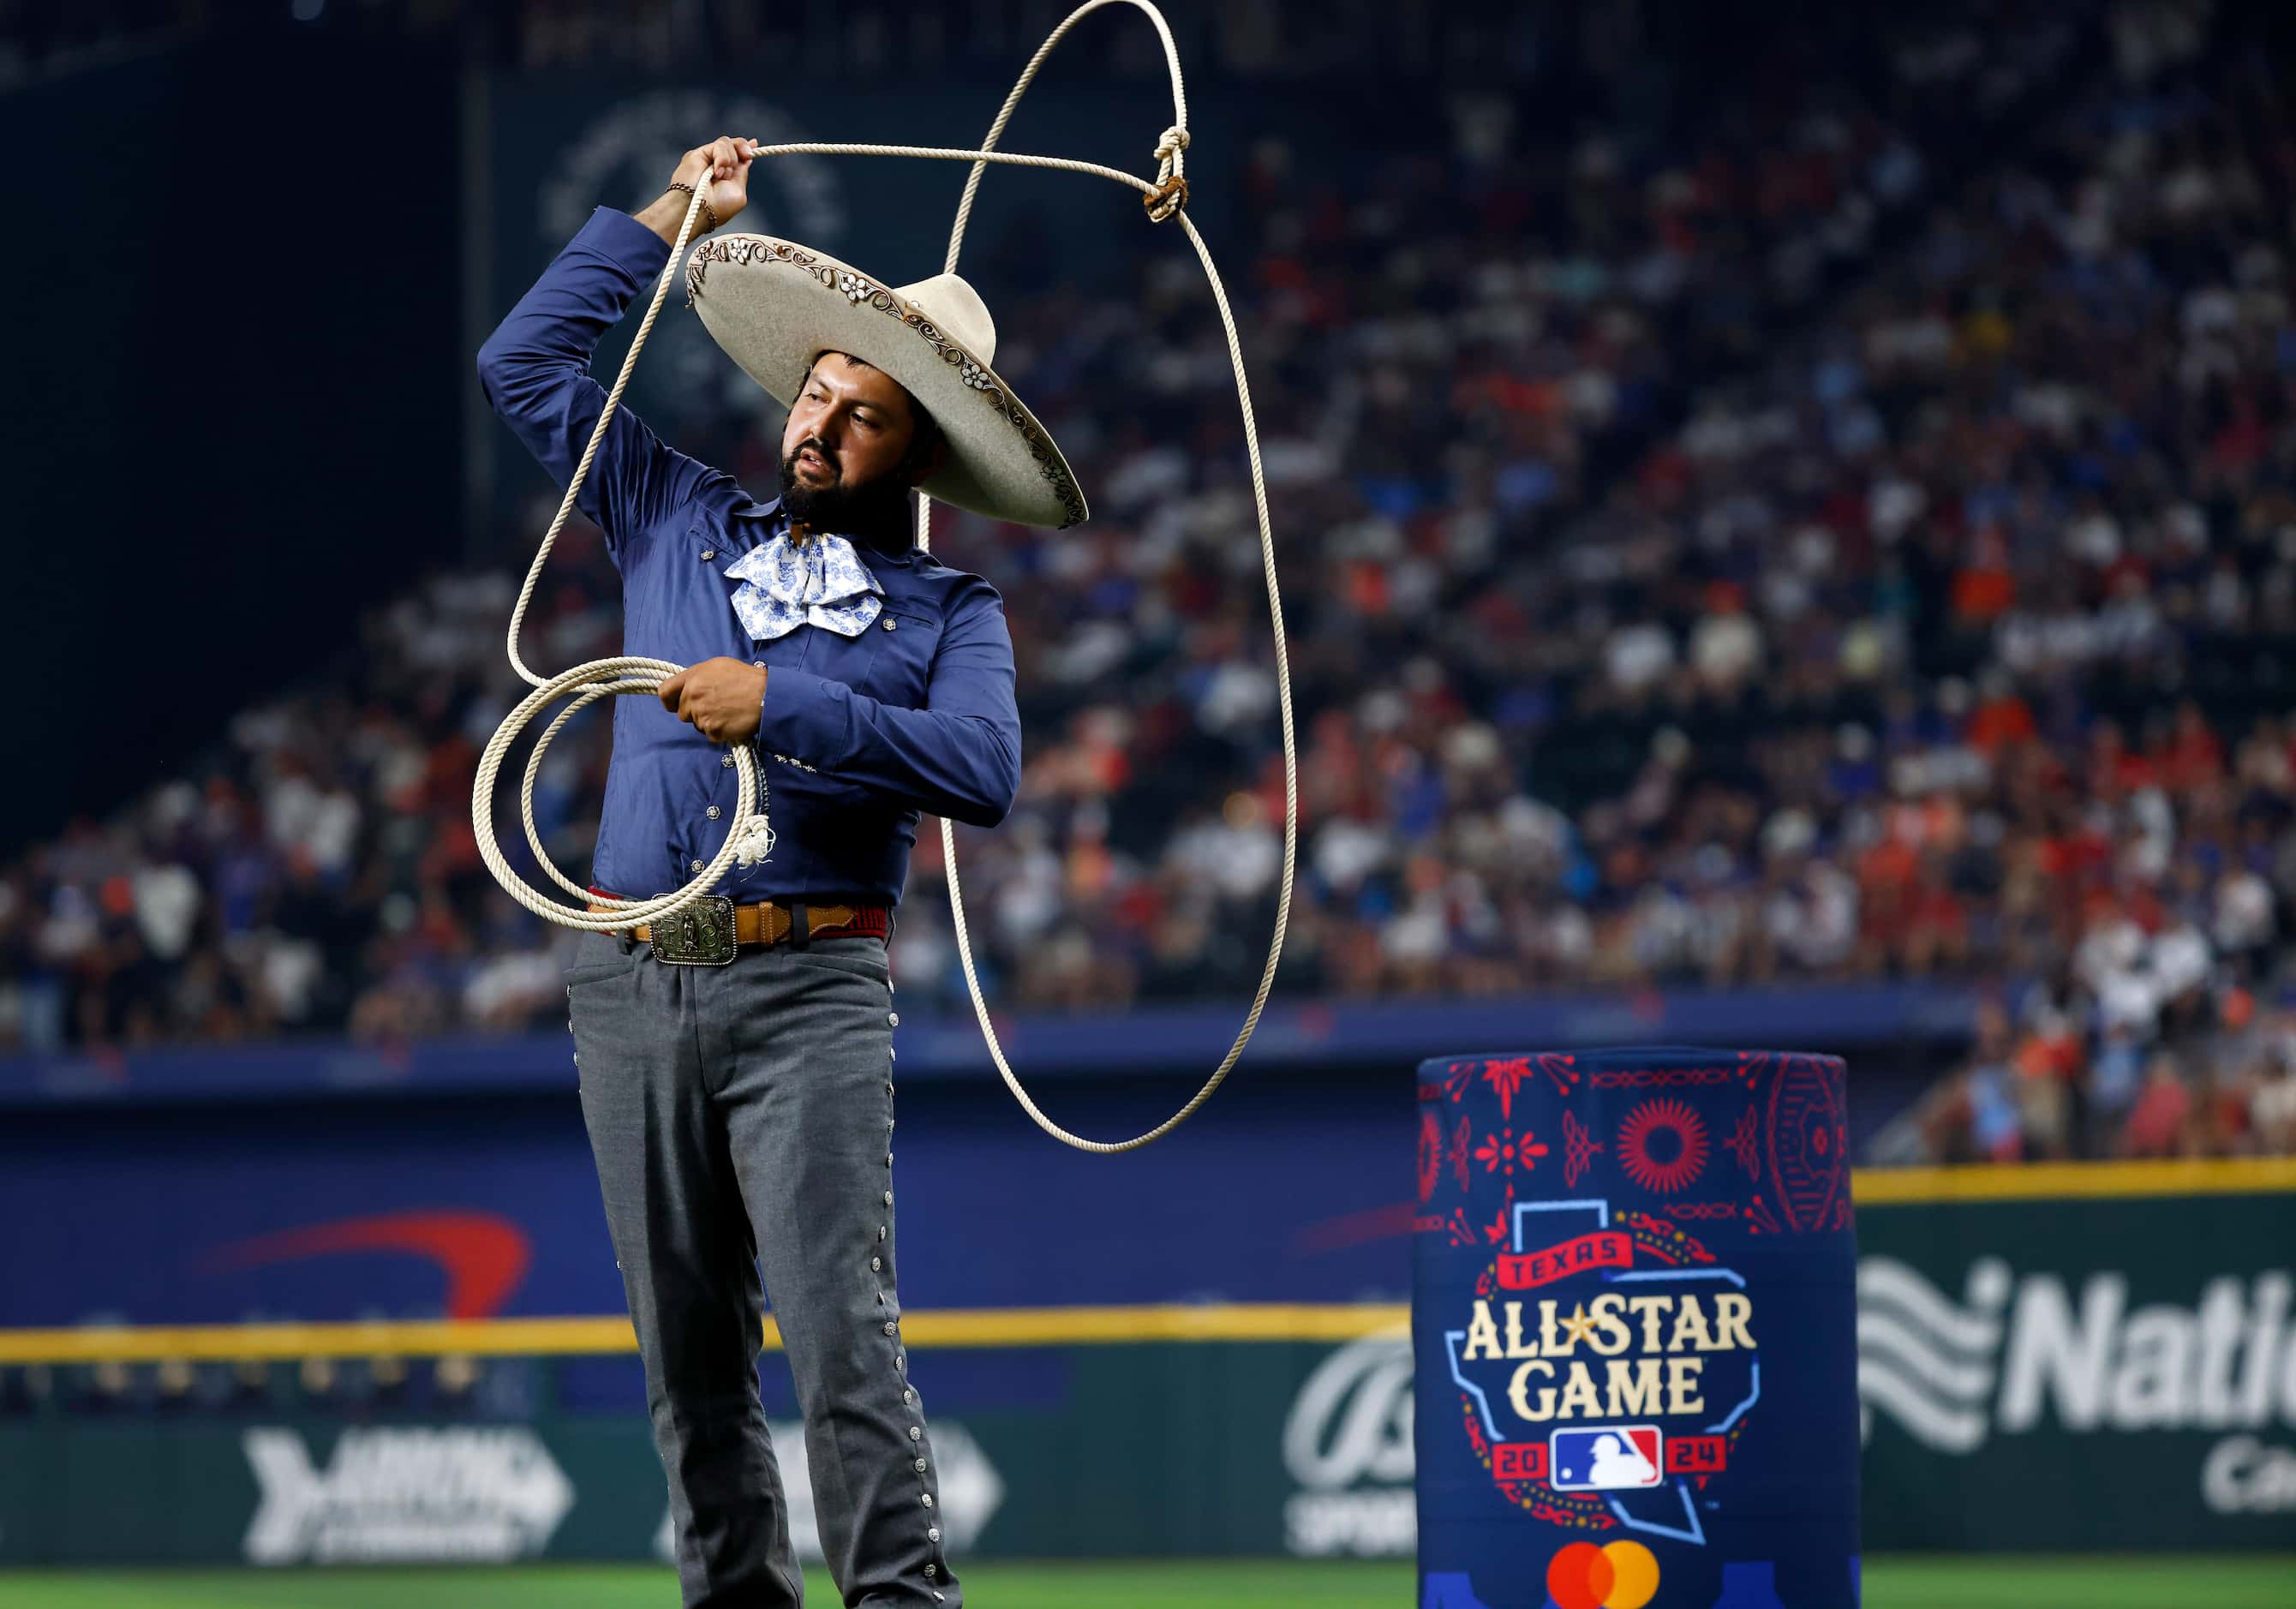 A vaquero performs roping tricks as the American League players are introduced during the...